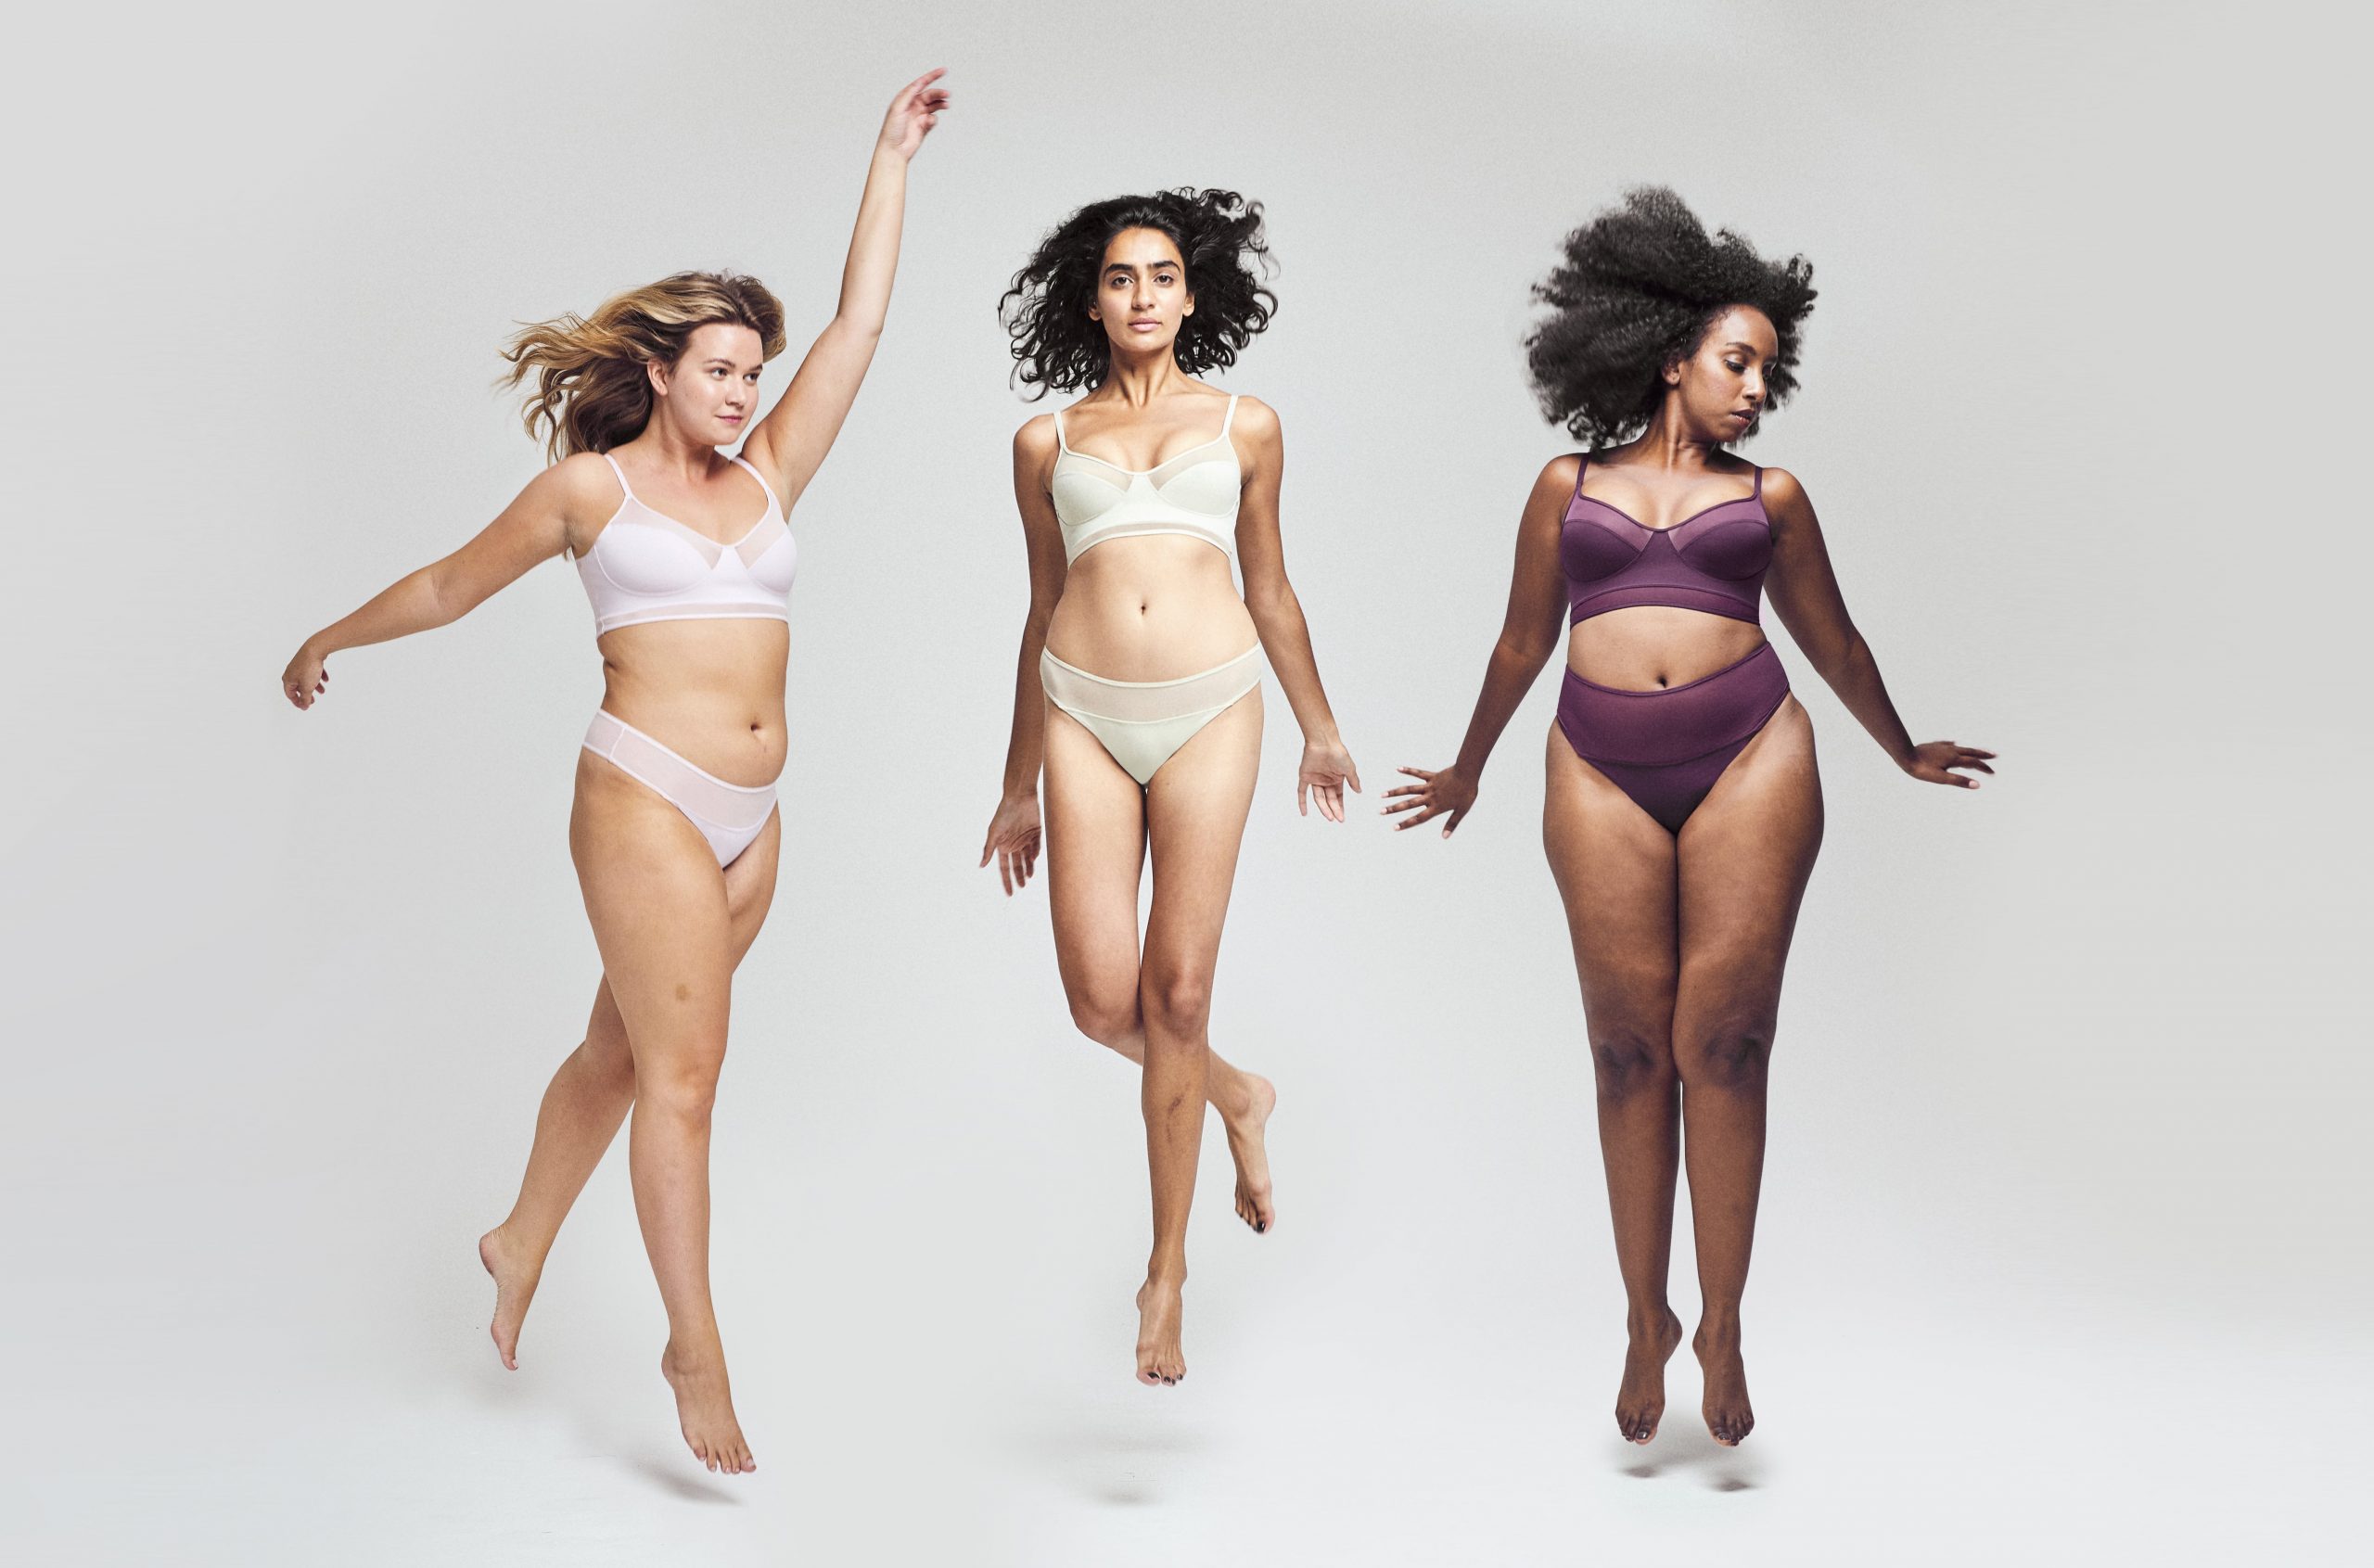 Underwear and shapewear campaigns celebrating every body type